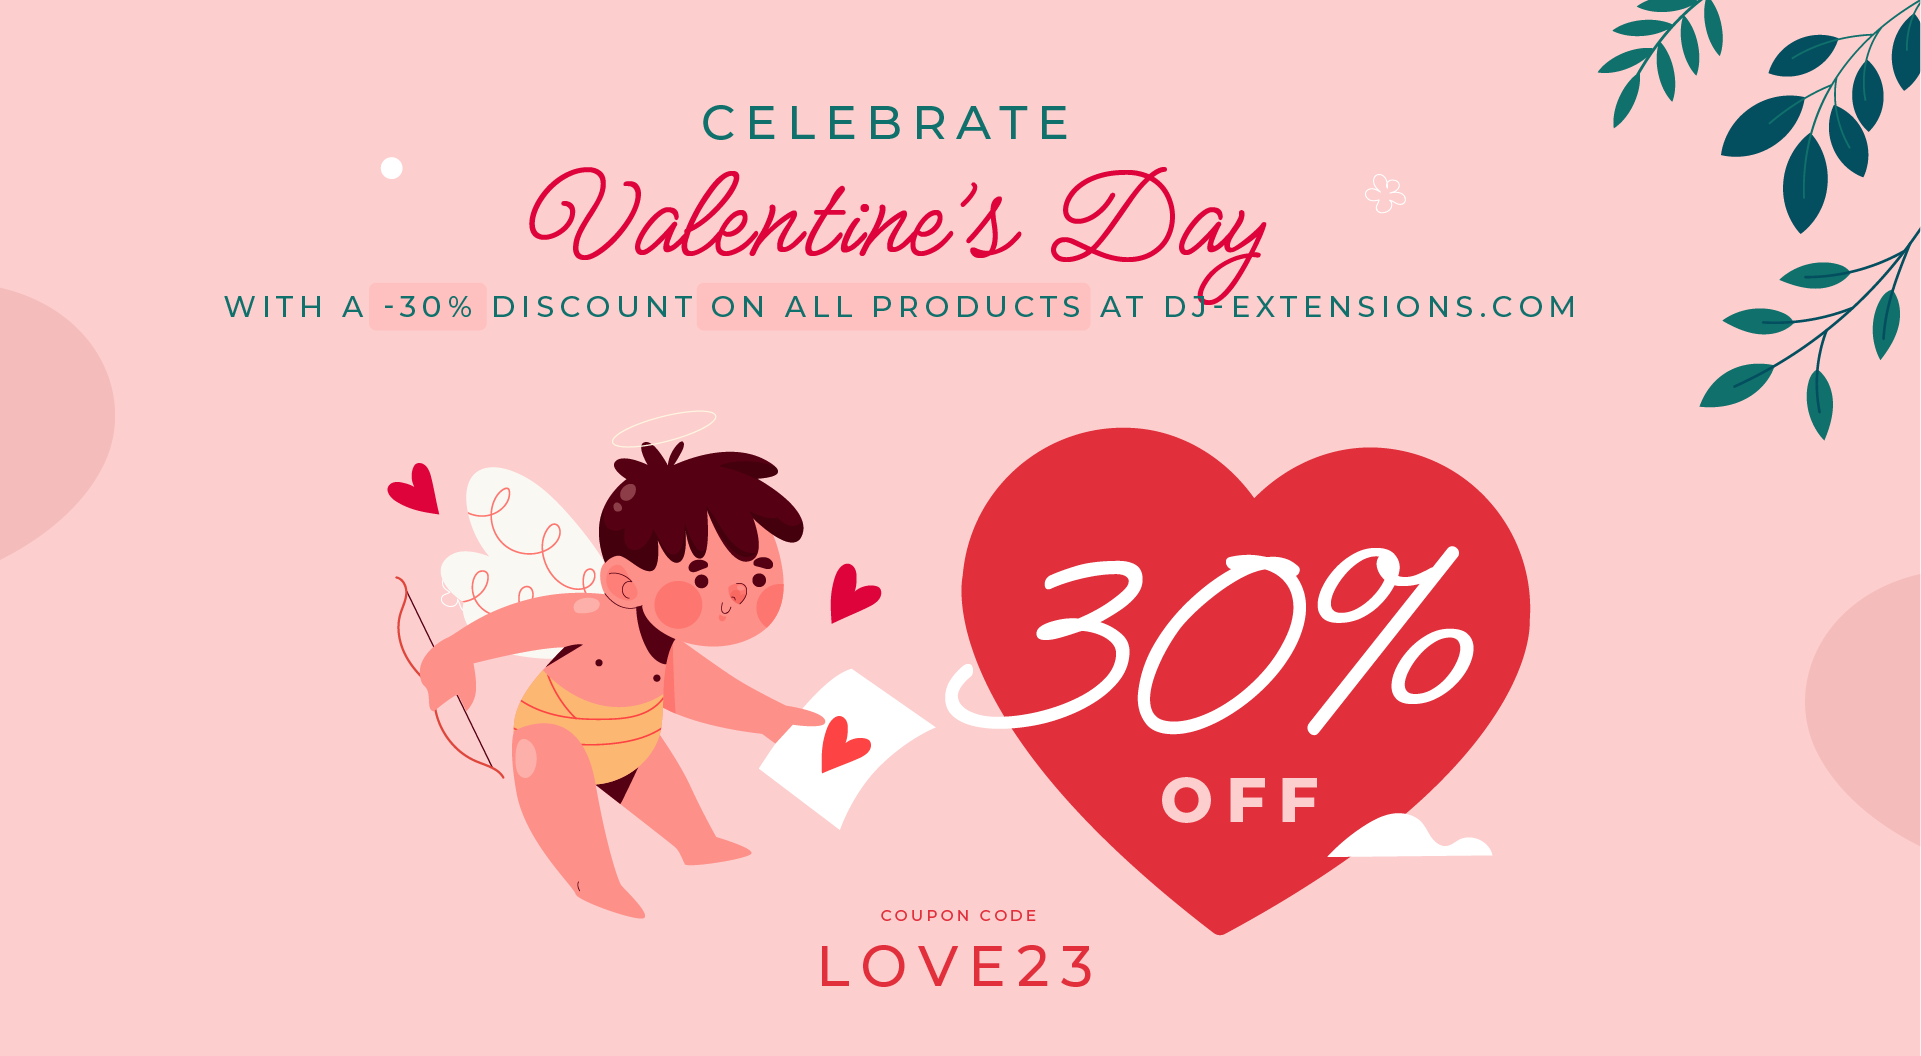 Valentine's Day Sale. Get all you need for Joomla and WordPress with a 30% discount